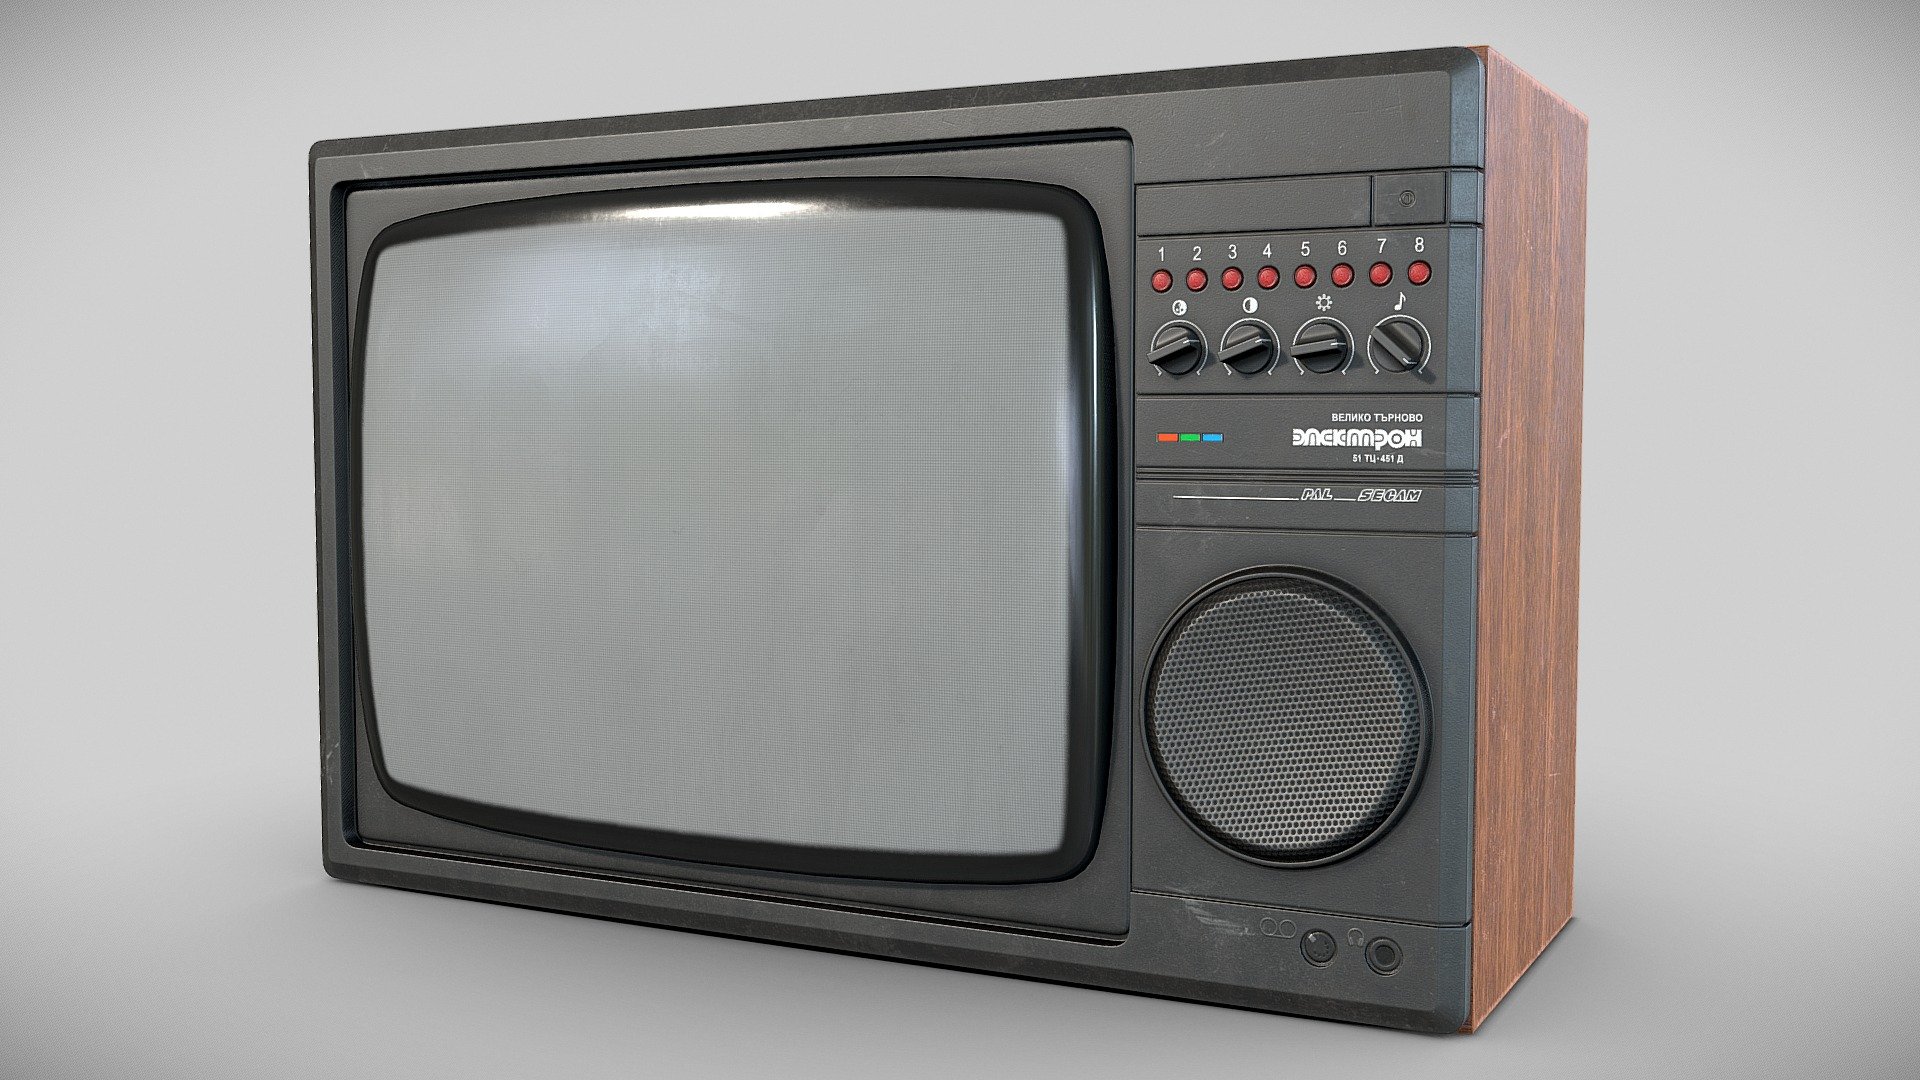 A model of an old TV made in the Soviet Union (USSR).
Color image television receiver.
Kinescope 3d model